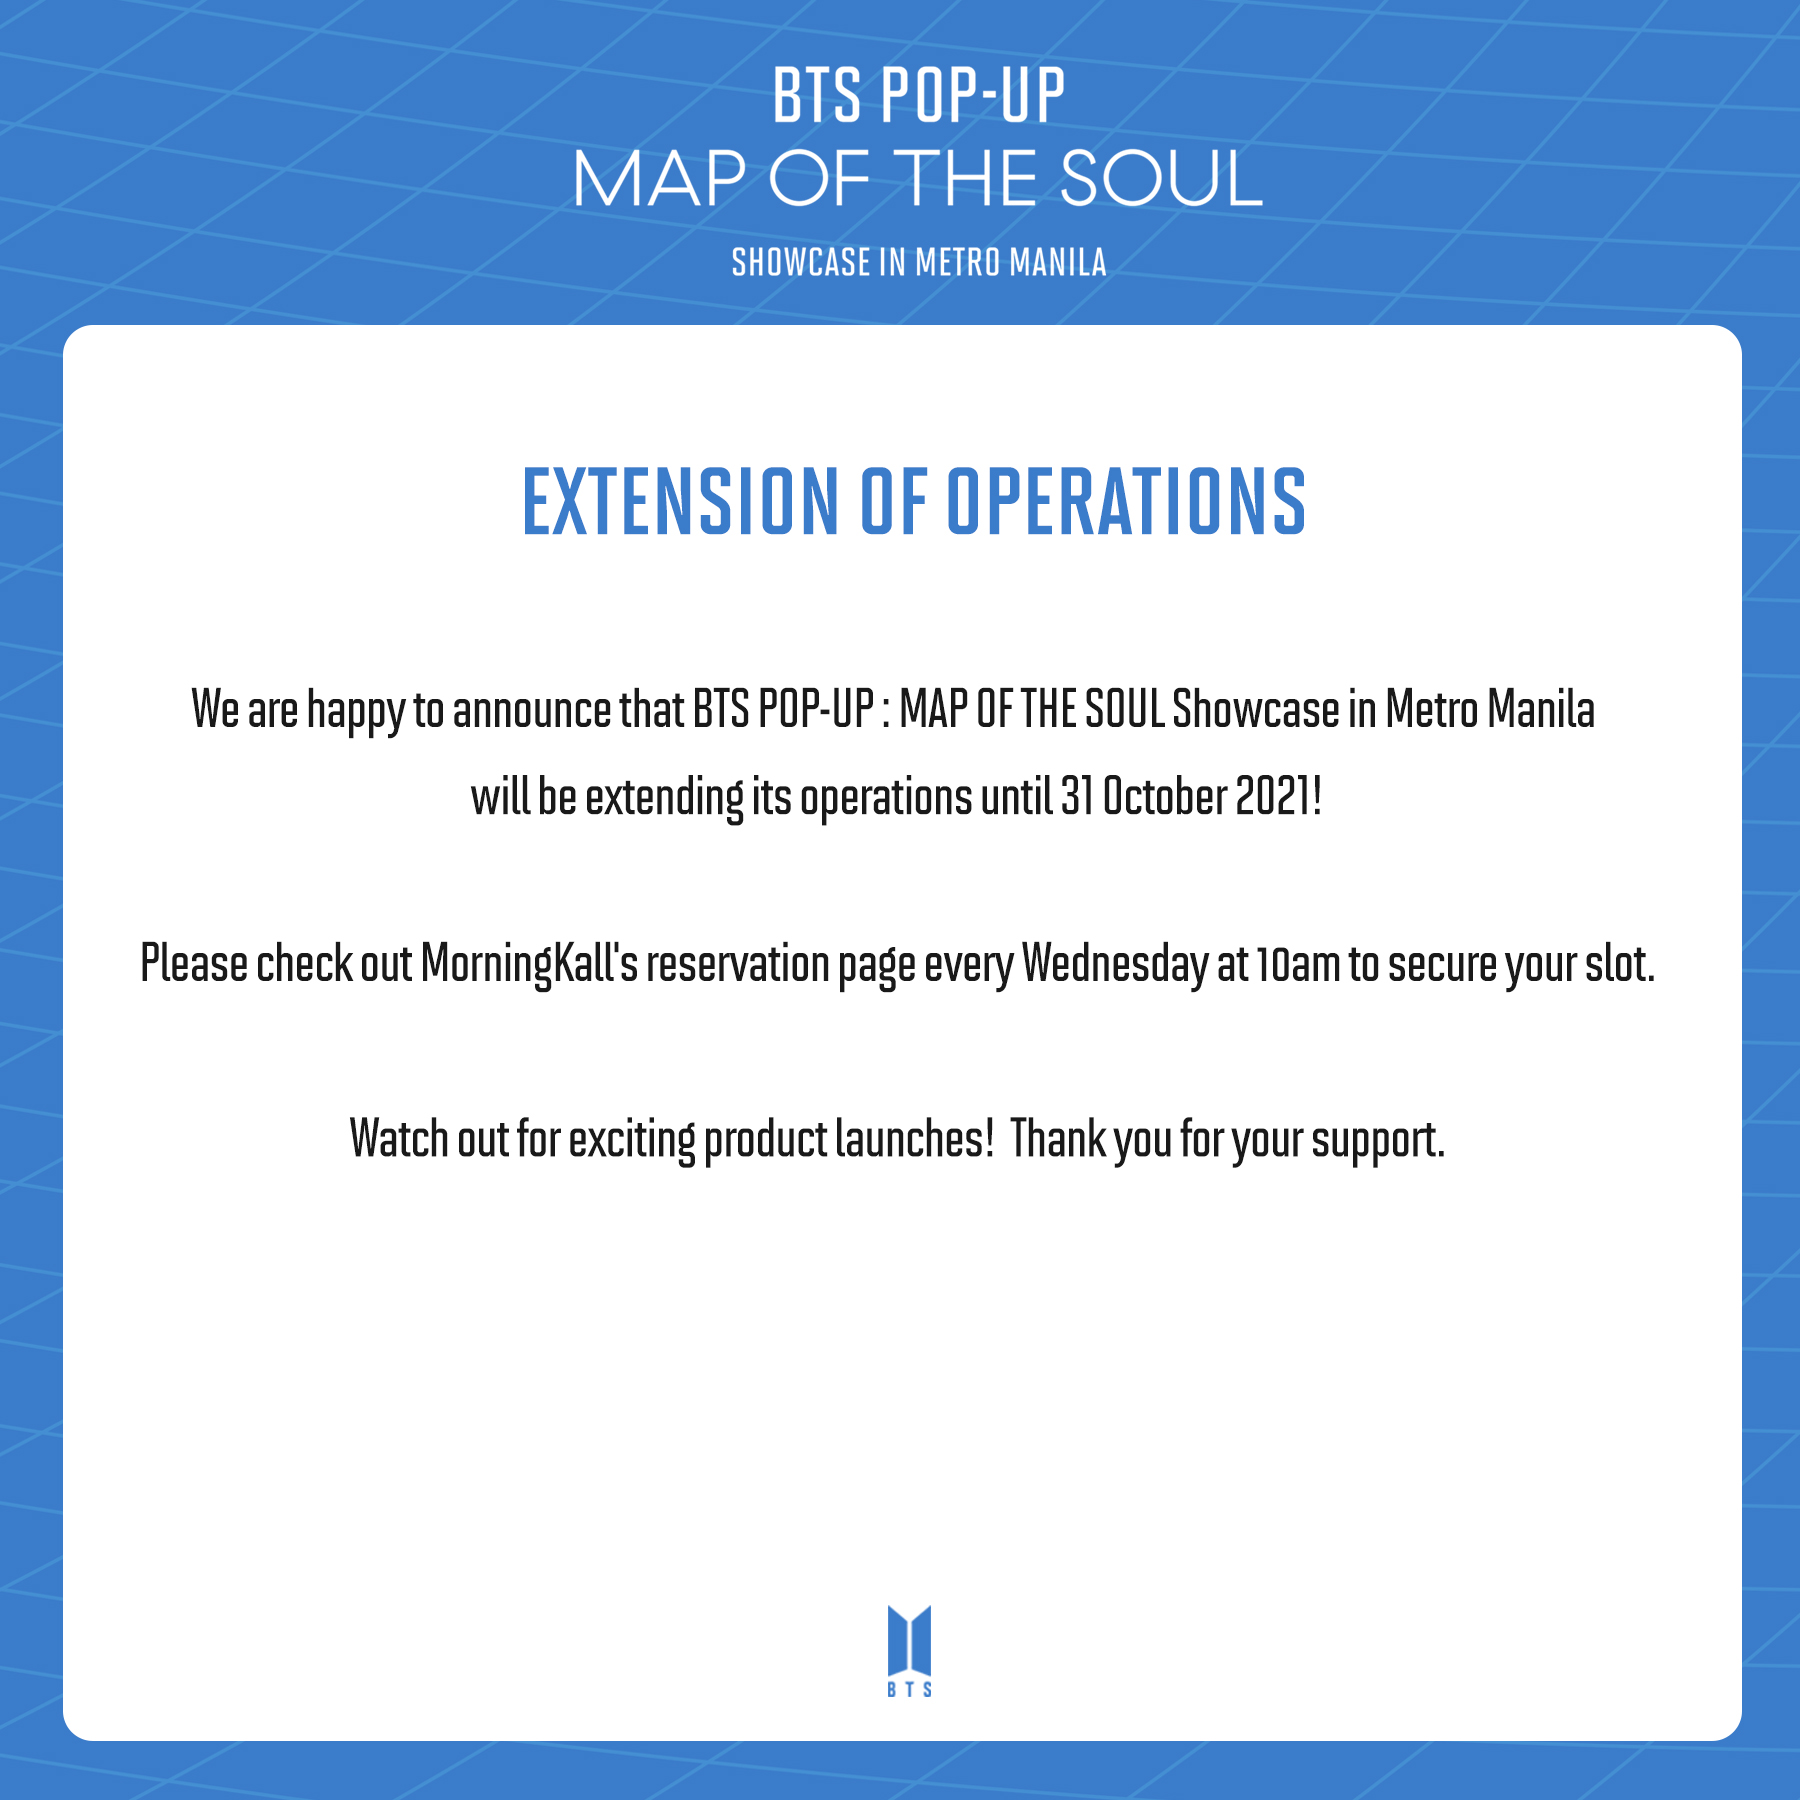 The BTS pop-up store in Manila has been extended